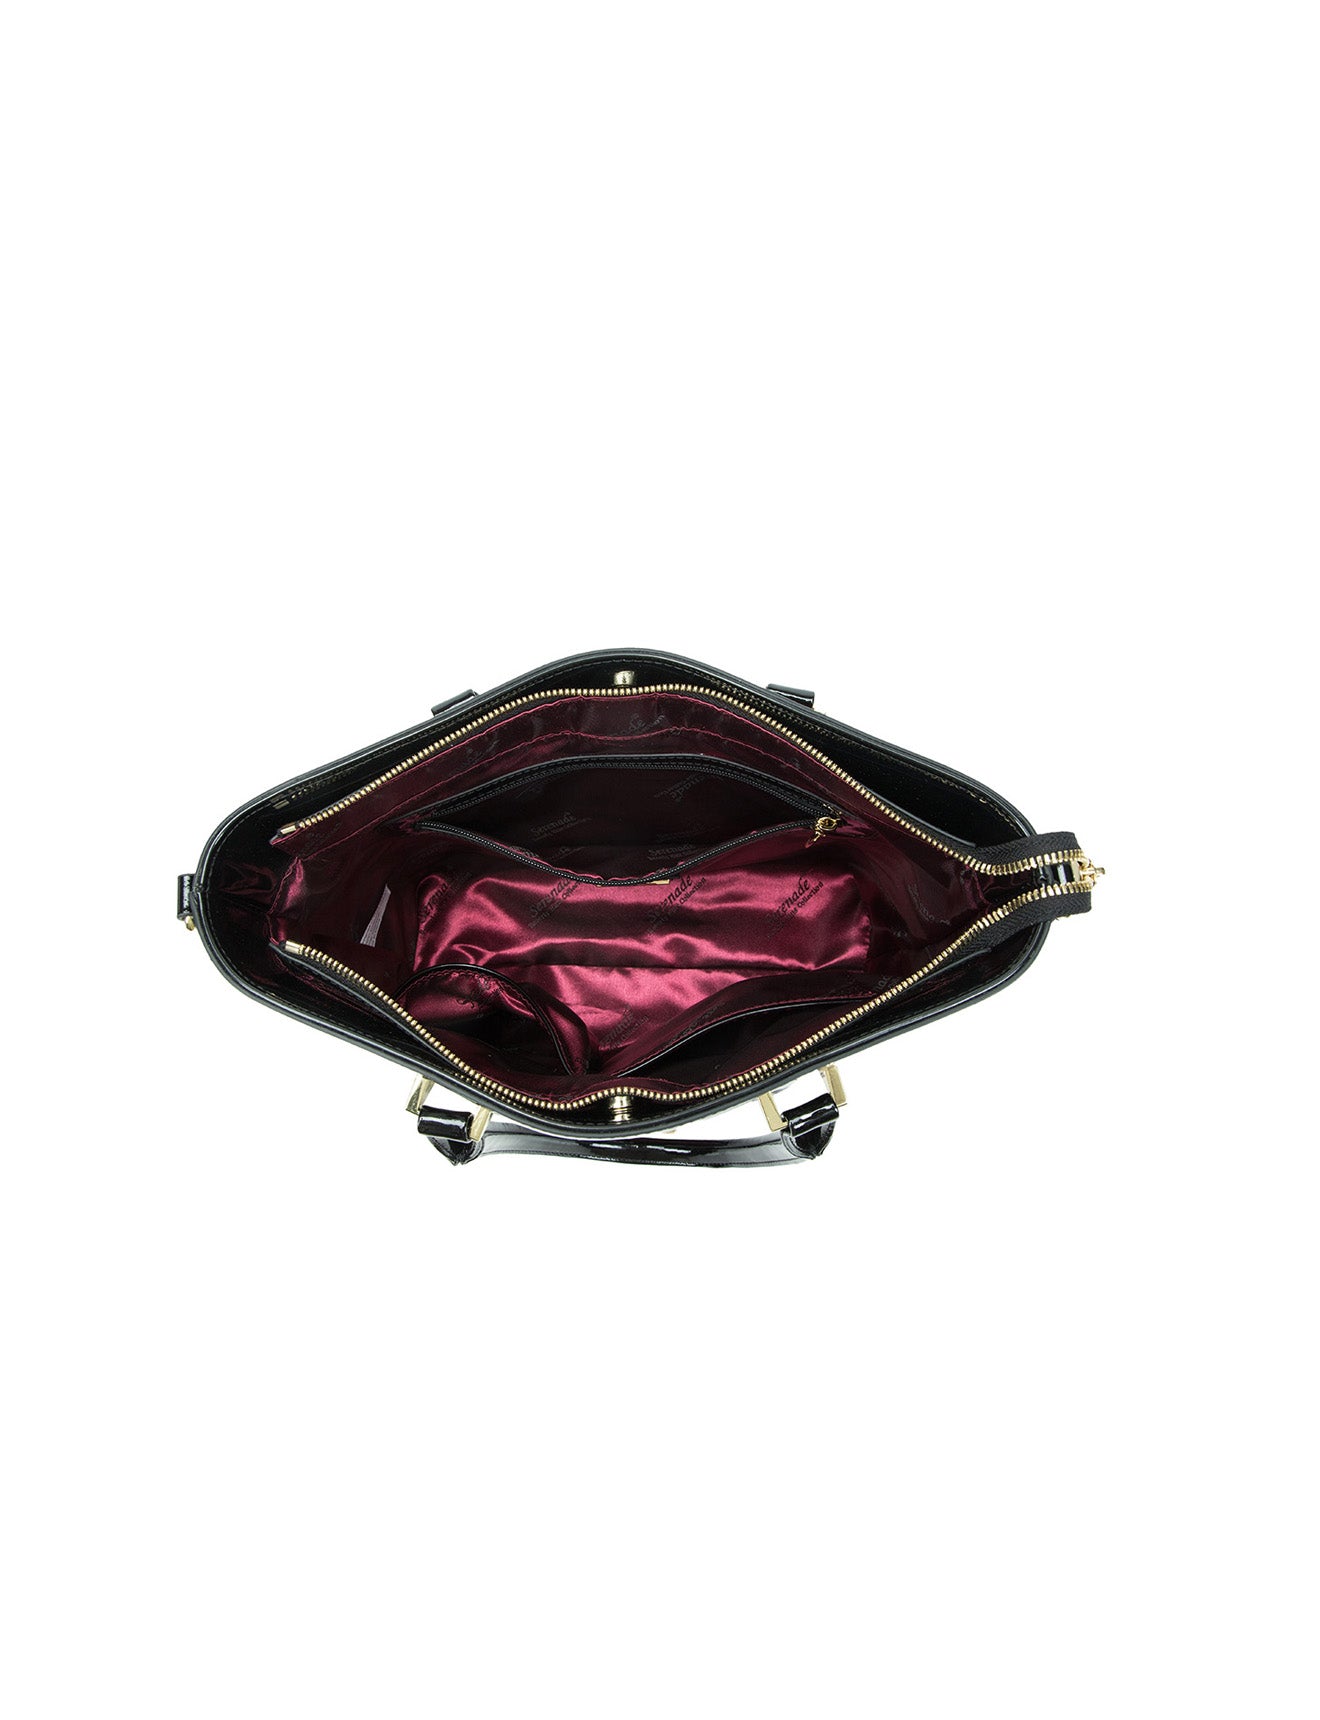 Serenade Abbey Patent Leather Grip Handle Bag